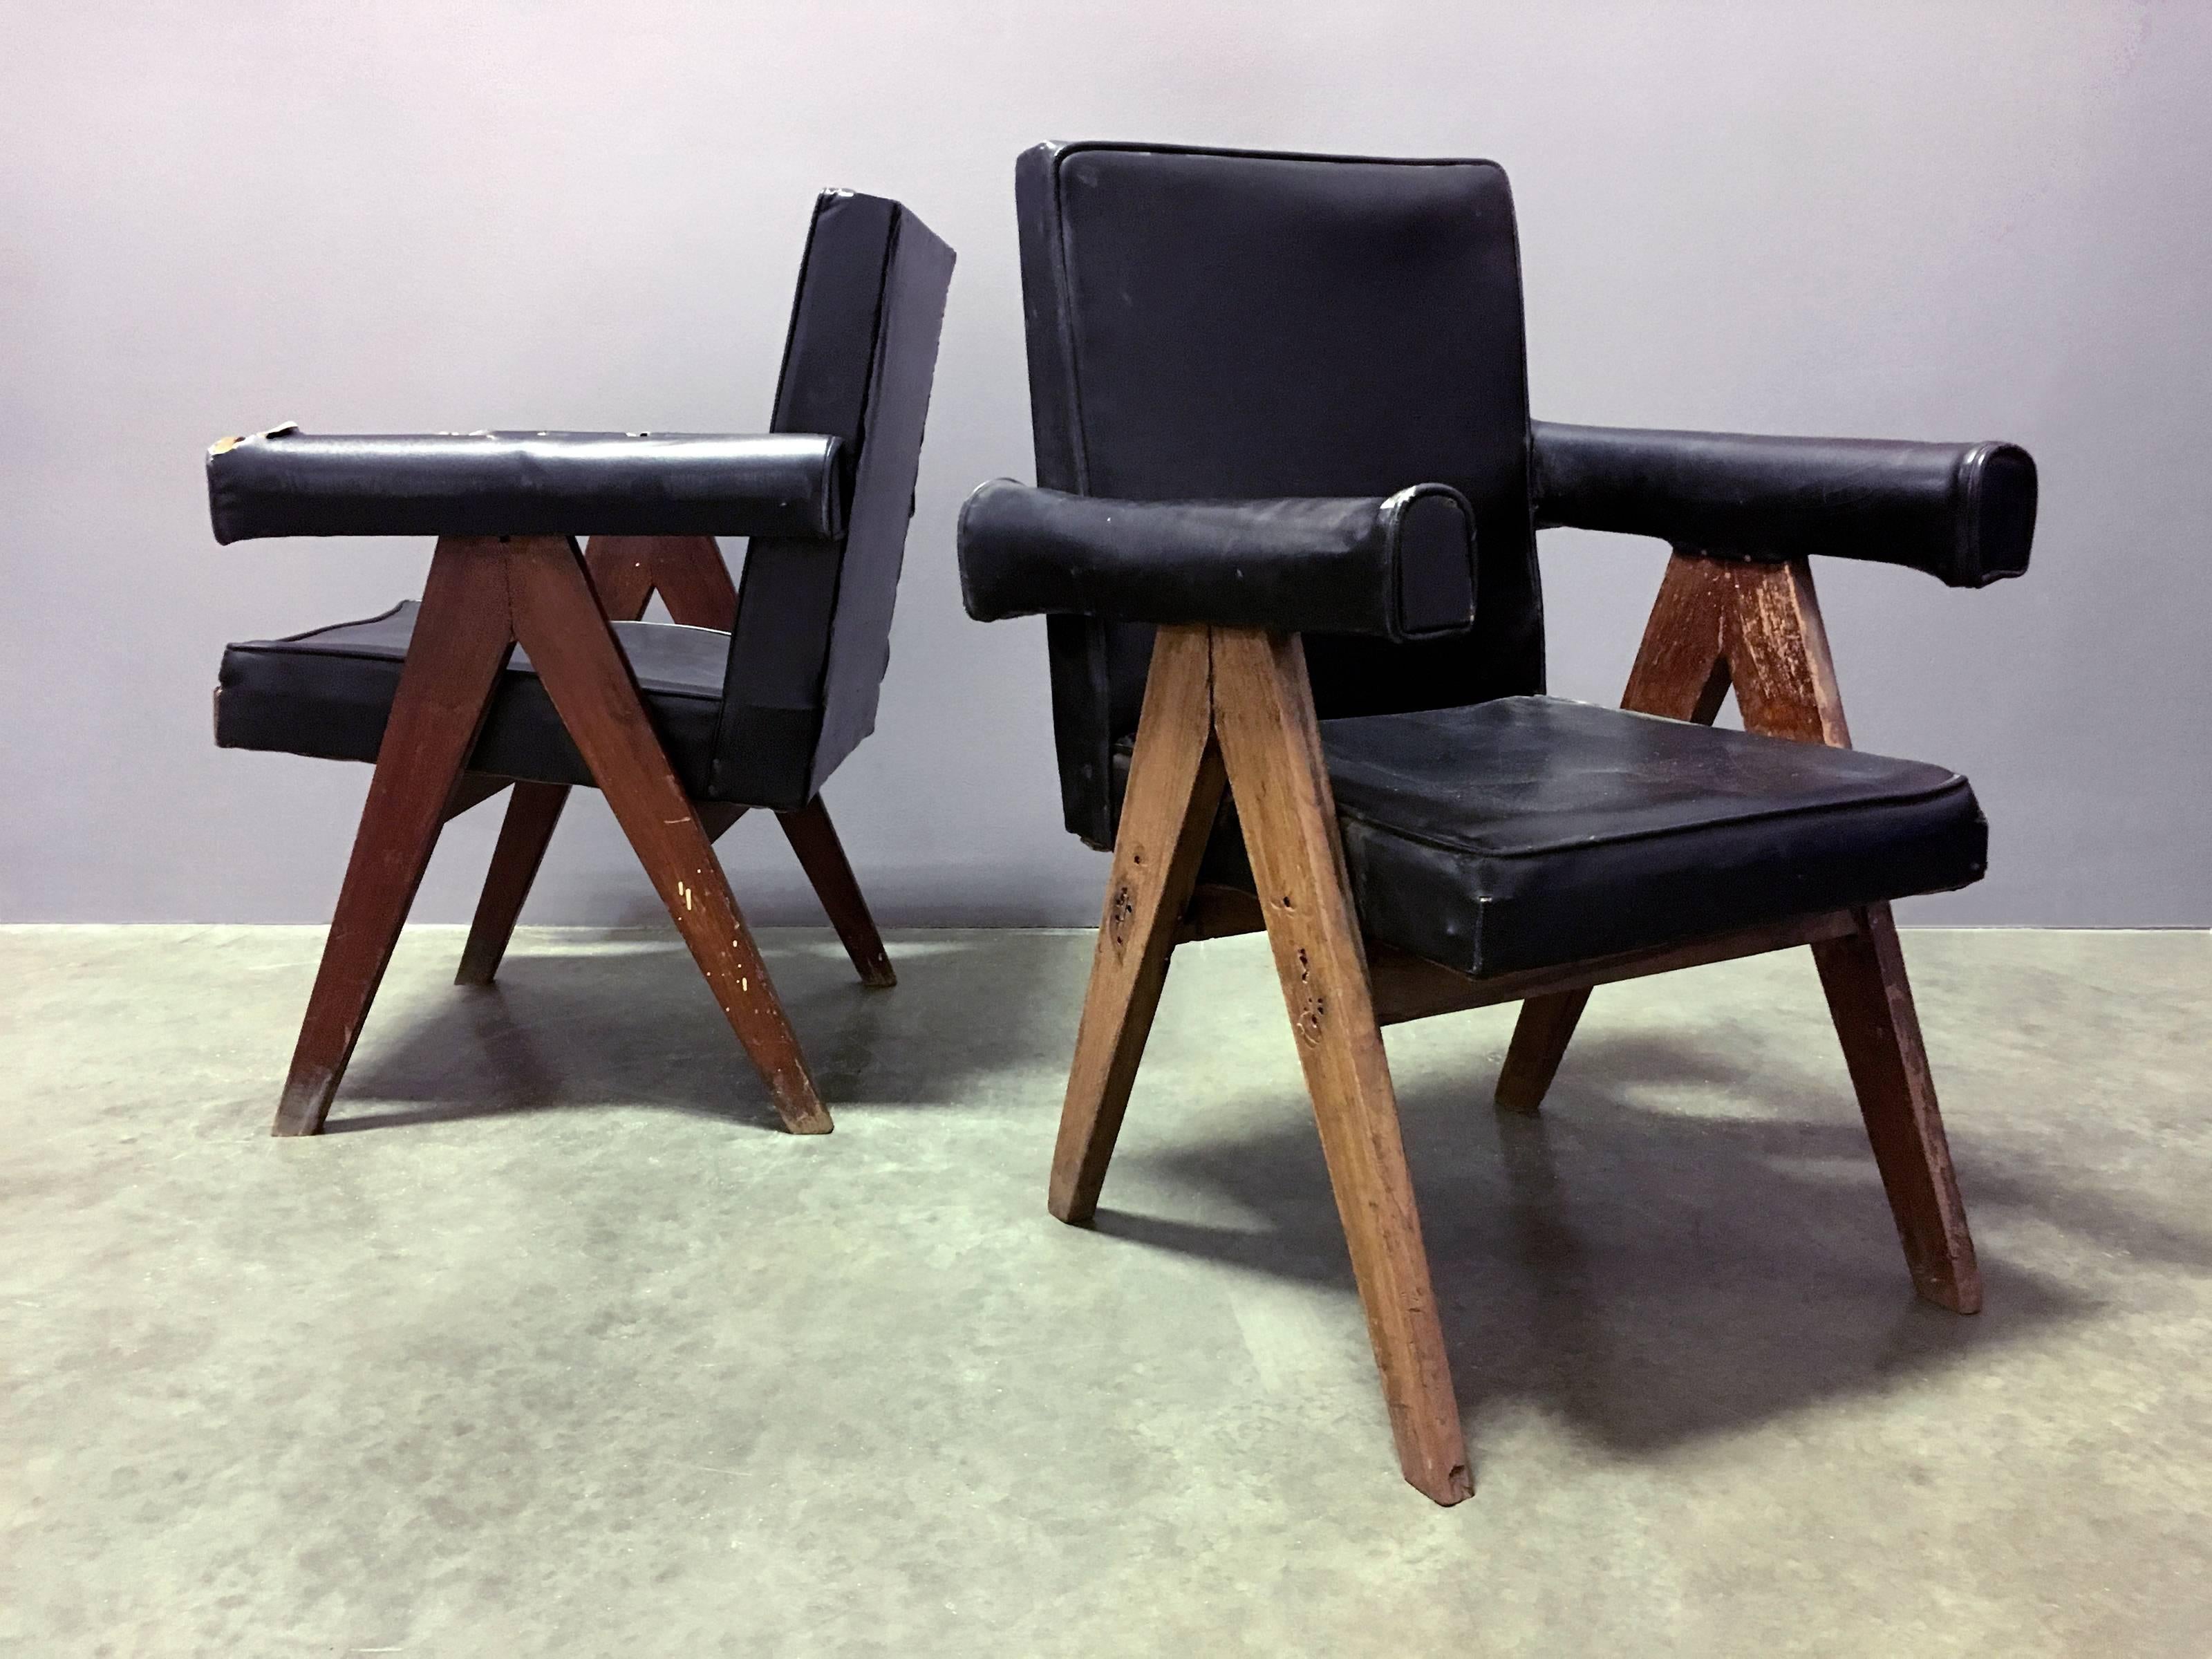  Pair of authentic, unrestored Committee chairs by Pierre Jeanneret from Chandigarh, India, c. 1953-54. Two pairs available. Sold in pairs, only. Price is $24,000 per pair. Chairs vary slightly in dimensions due to handmade nature of the design.